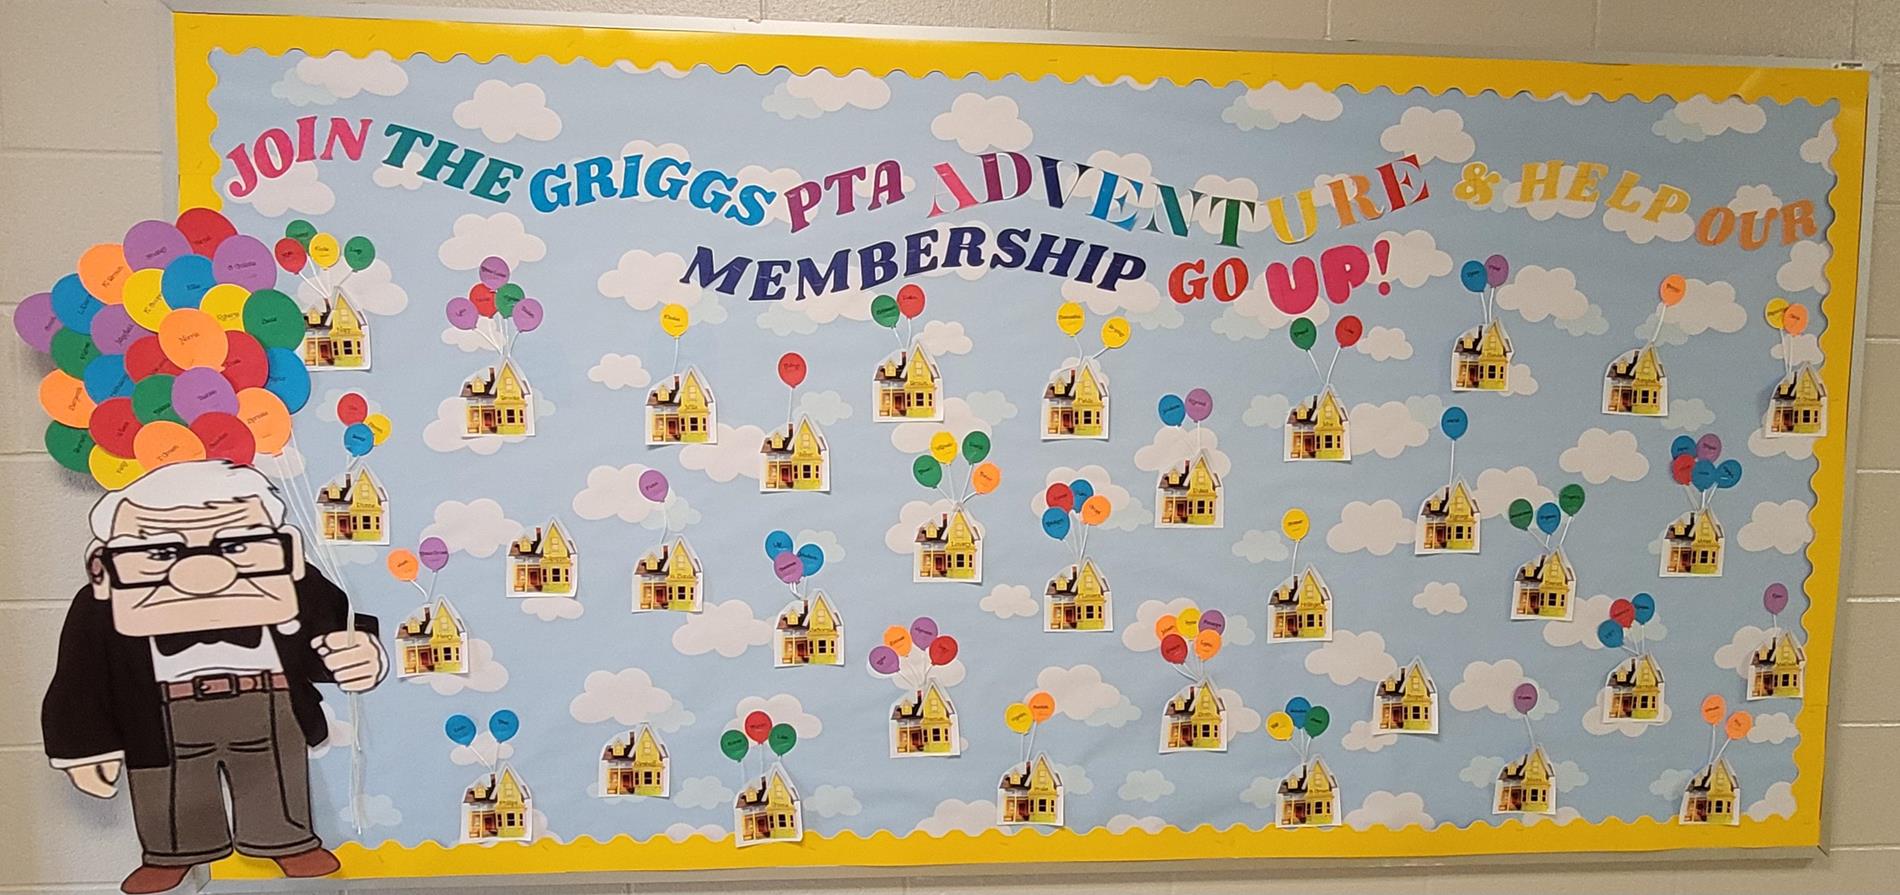 Class/staff membership board. Balloons are those who have joined.